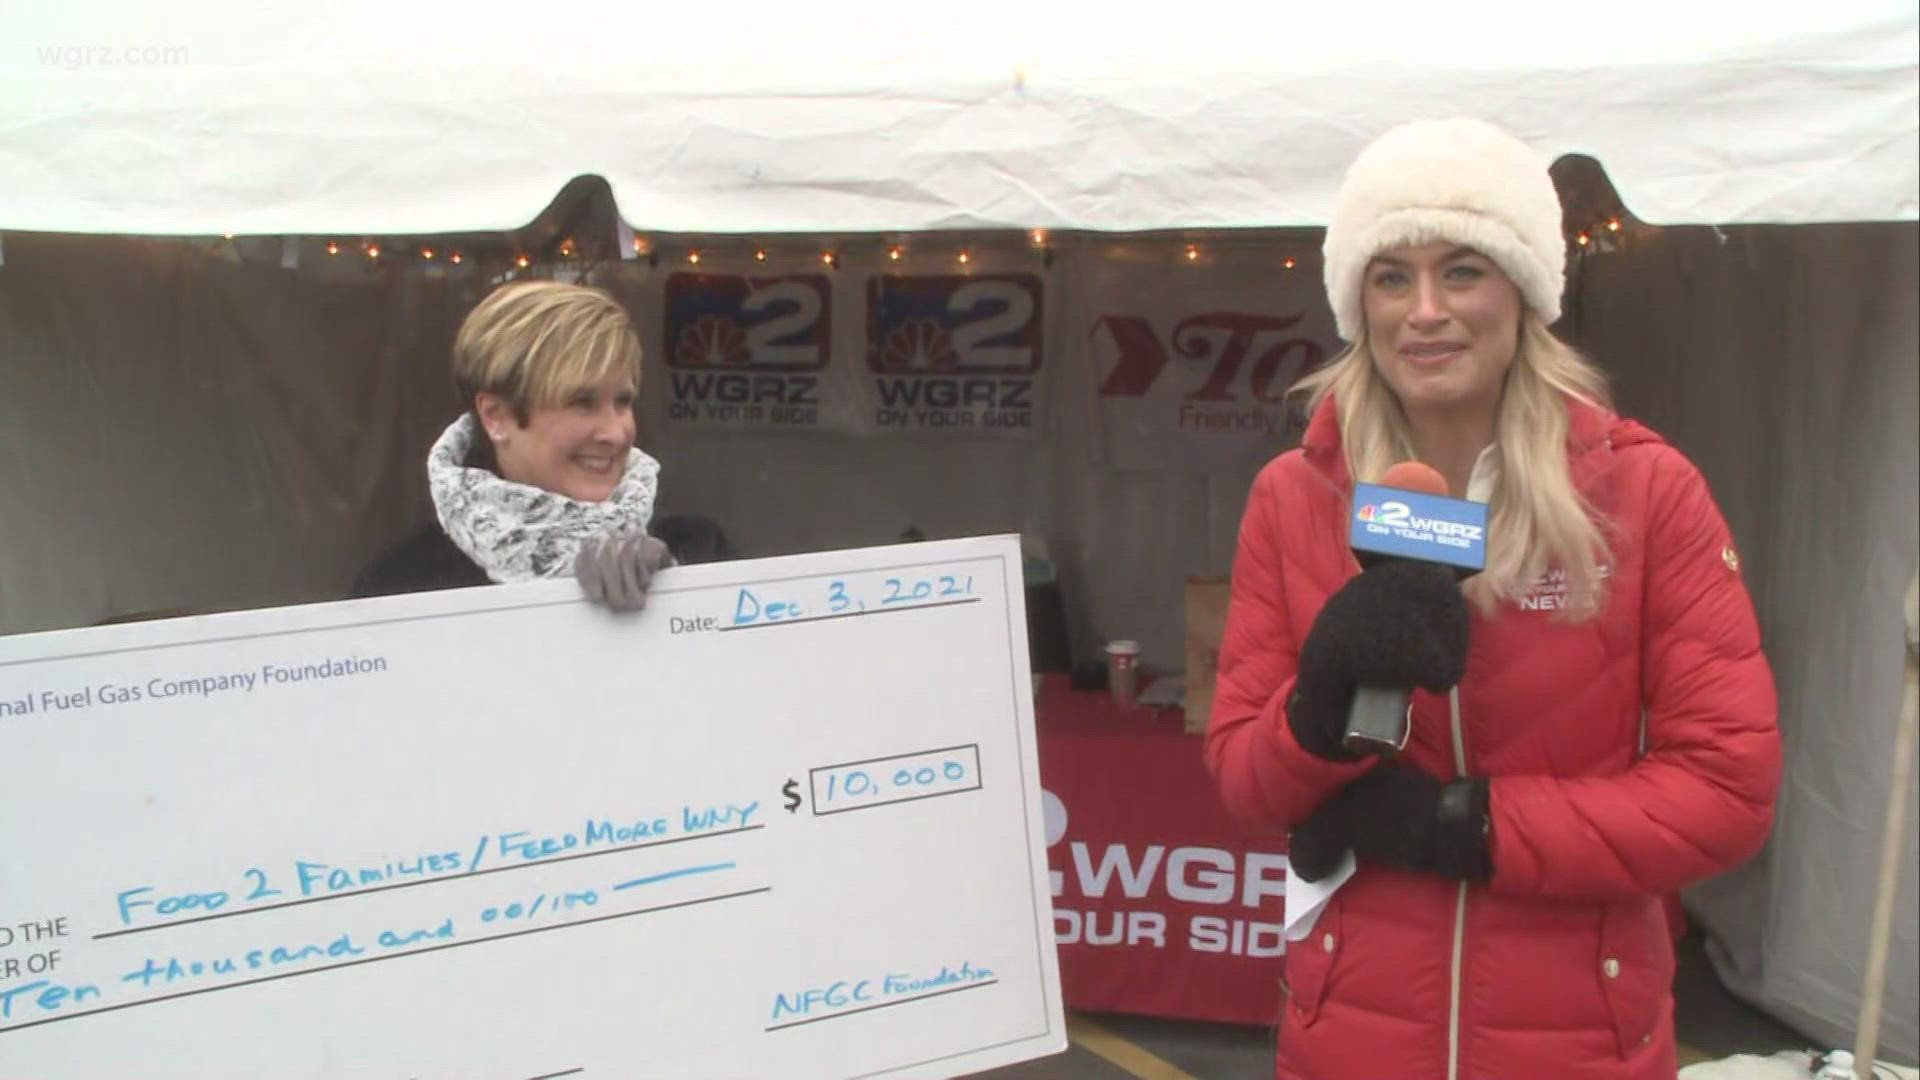 National Fuel just donated $10,000 to the food  2 families food drive.